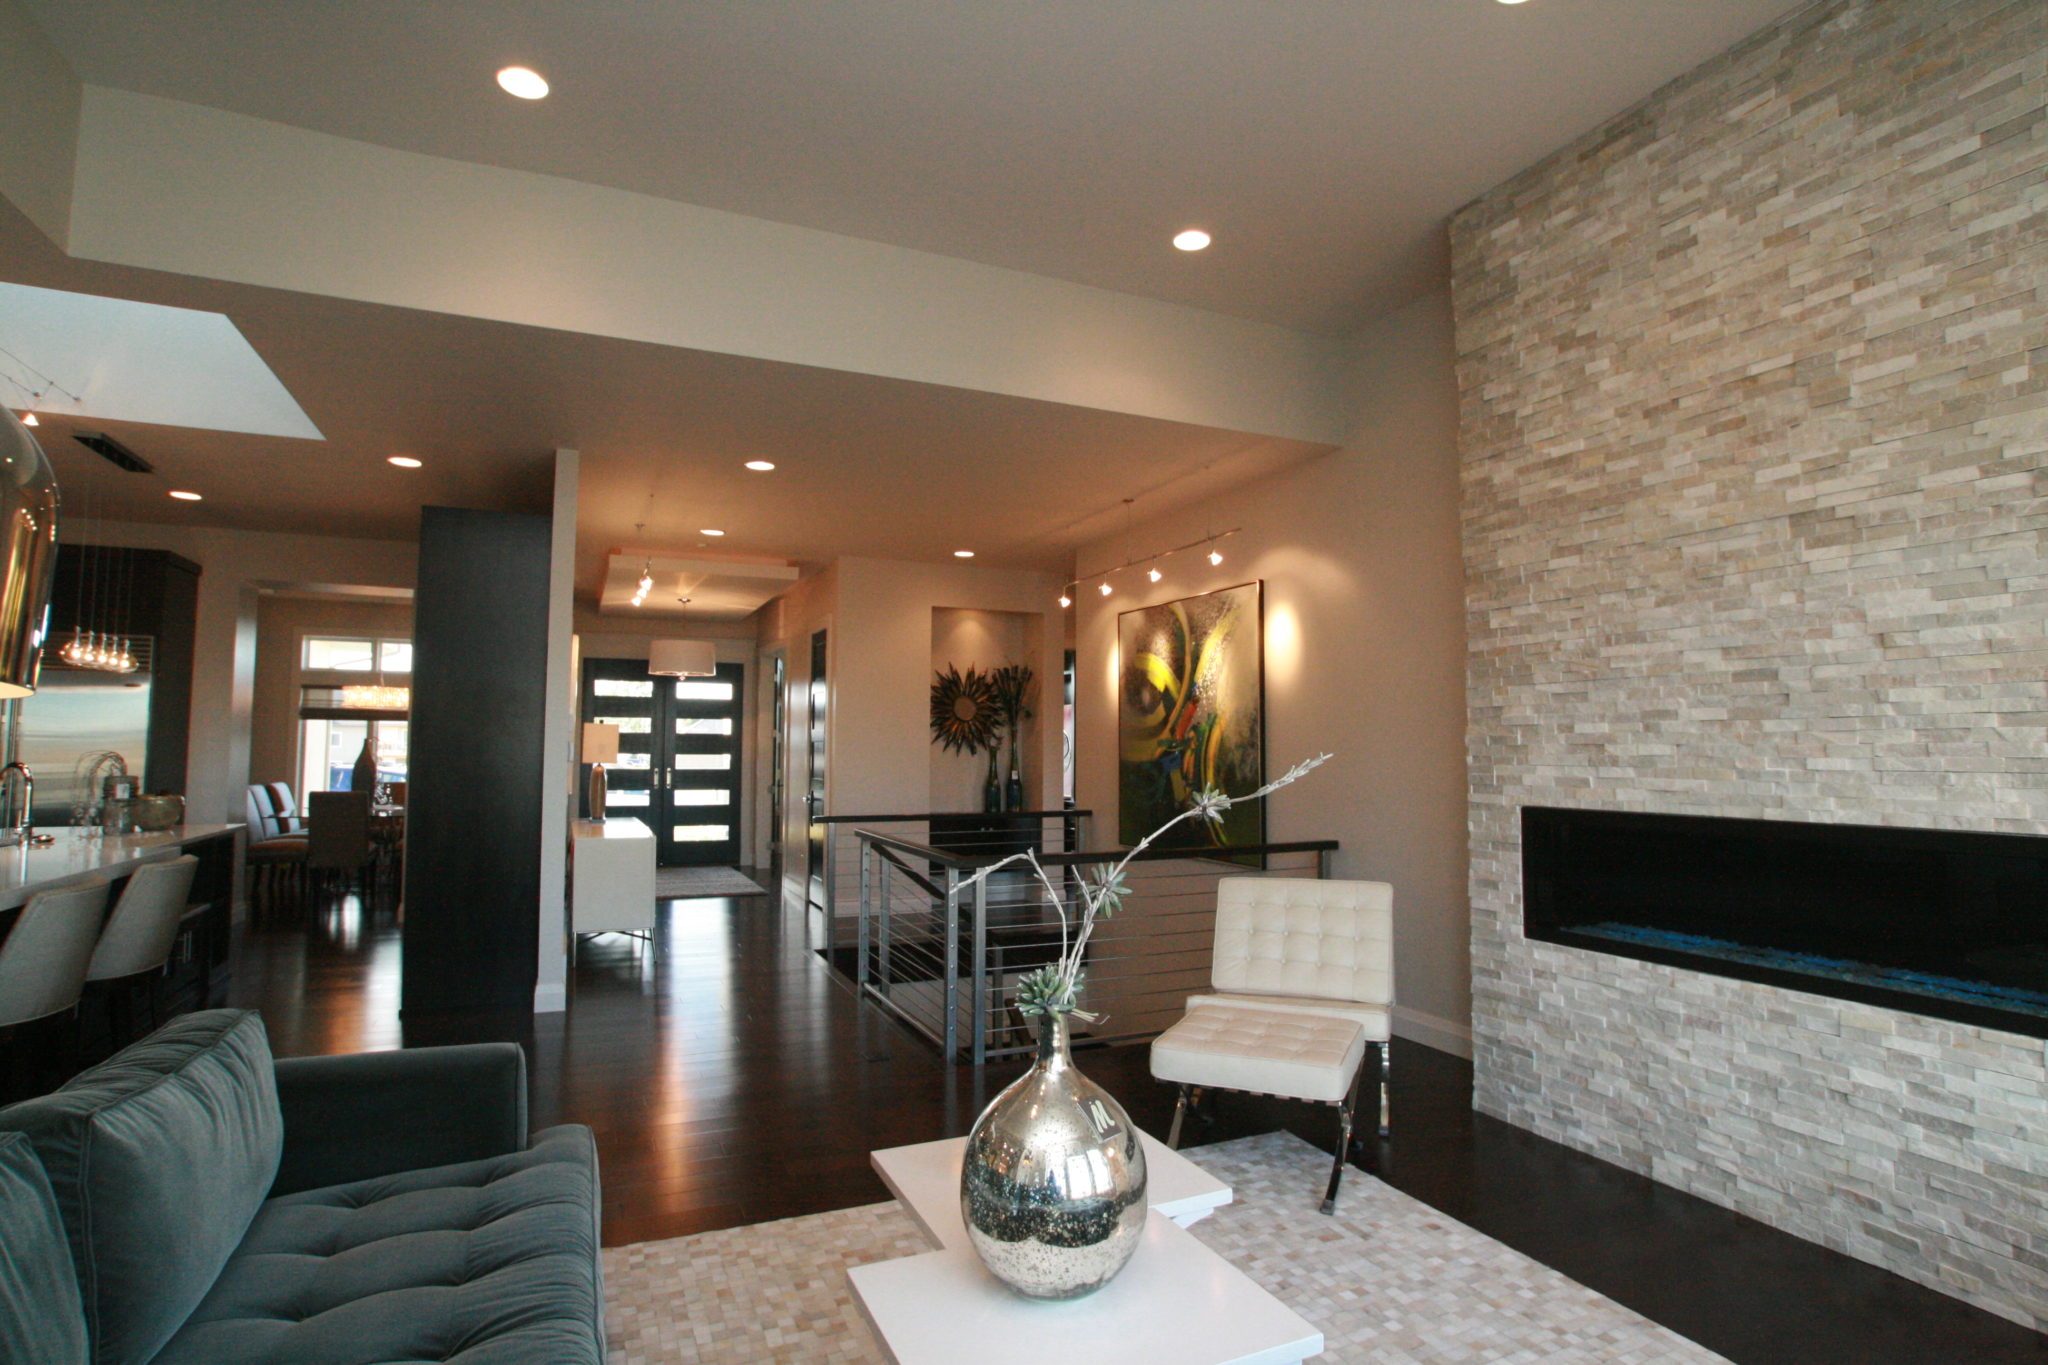 Modern and Sleek Fireplace with Front Entrance View